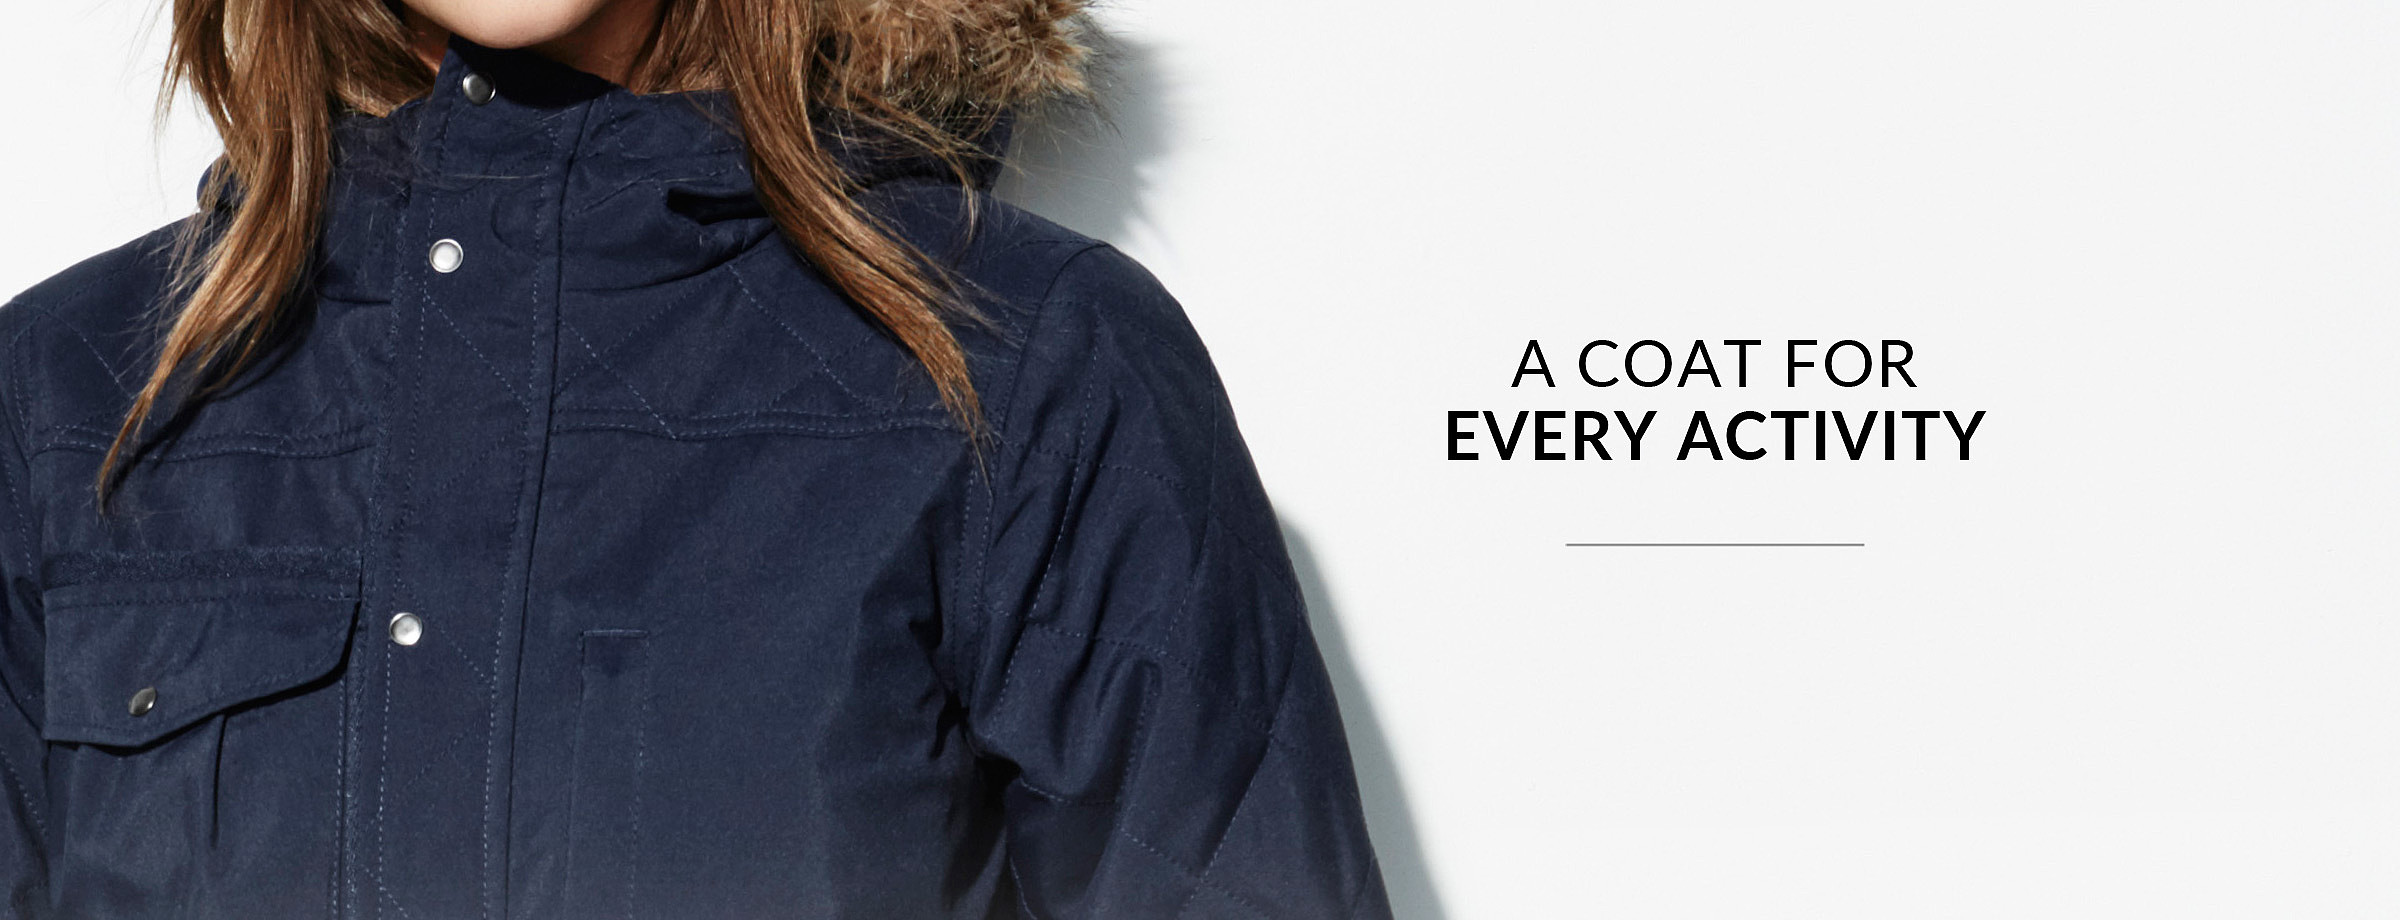 A coat for every activity